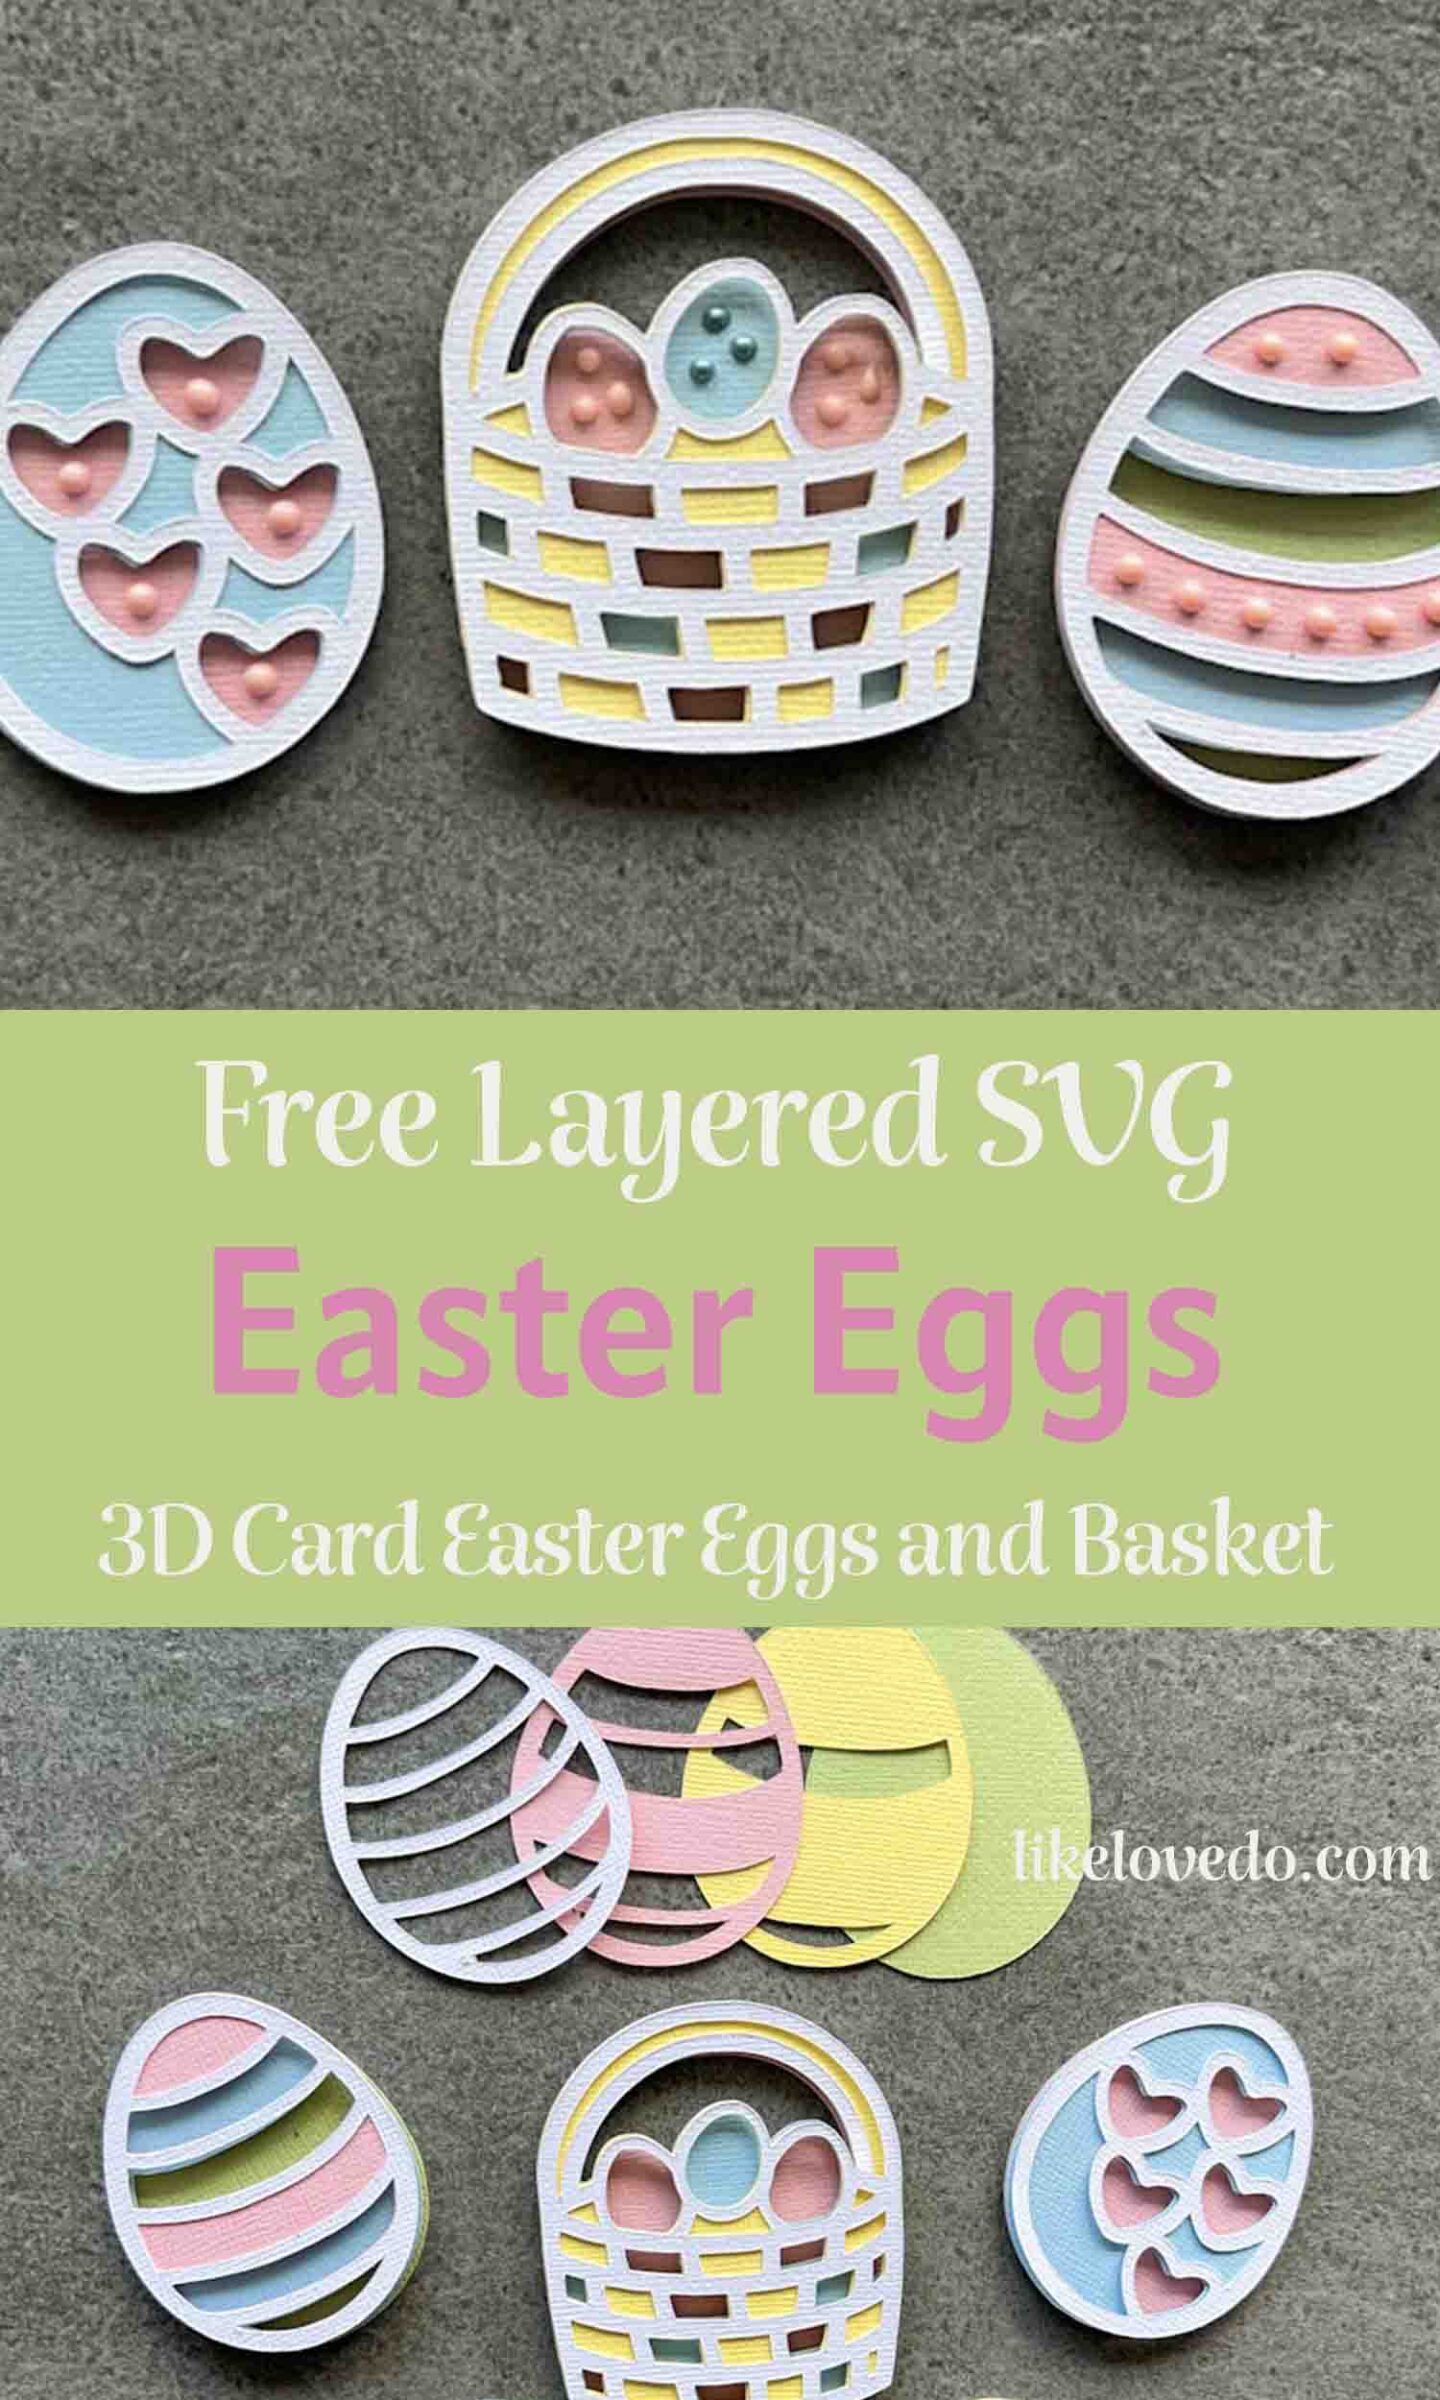 Free Layered Easter Egg and Easter basket SVGs free mini card craft cut files